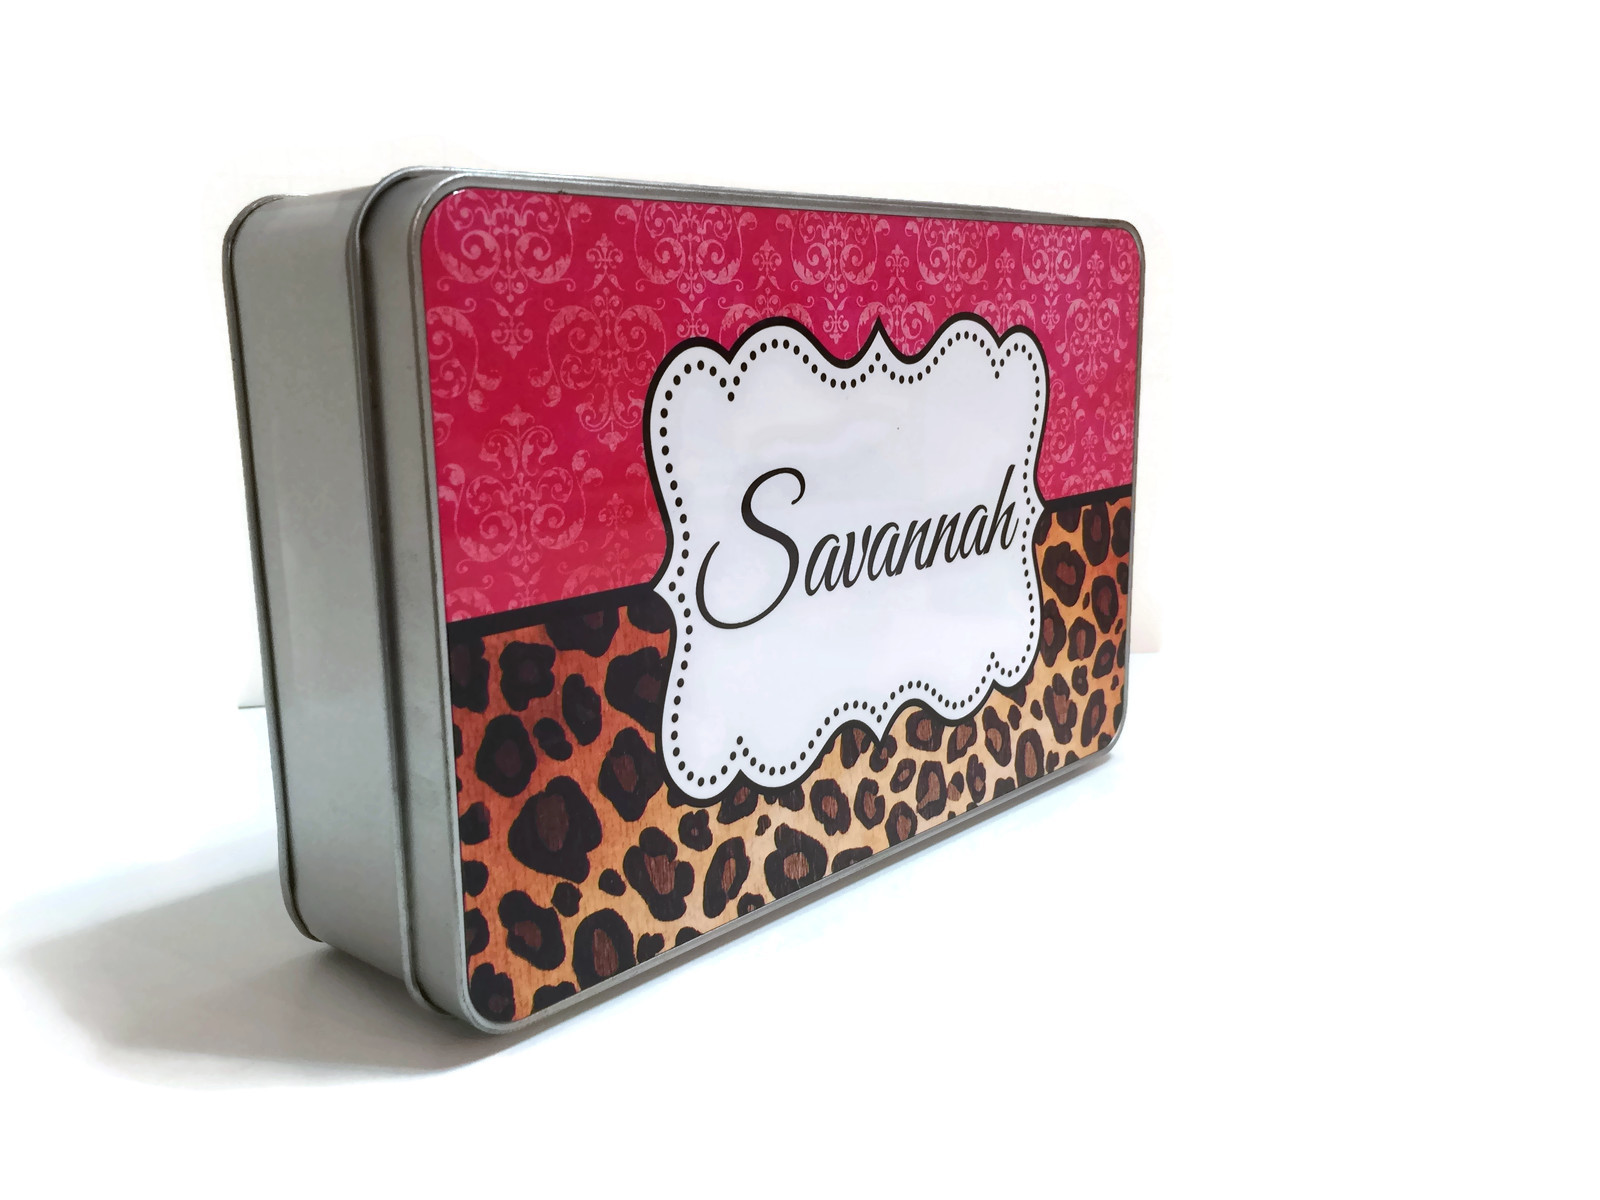 Puzzle Box made with sublimation printing